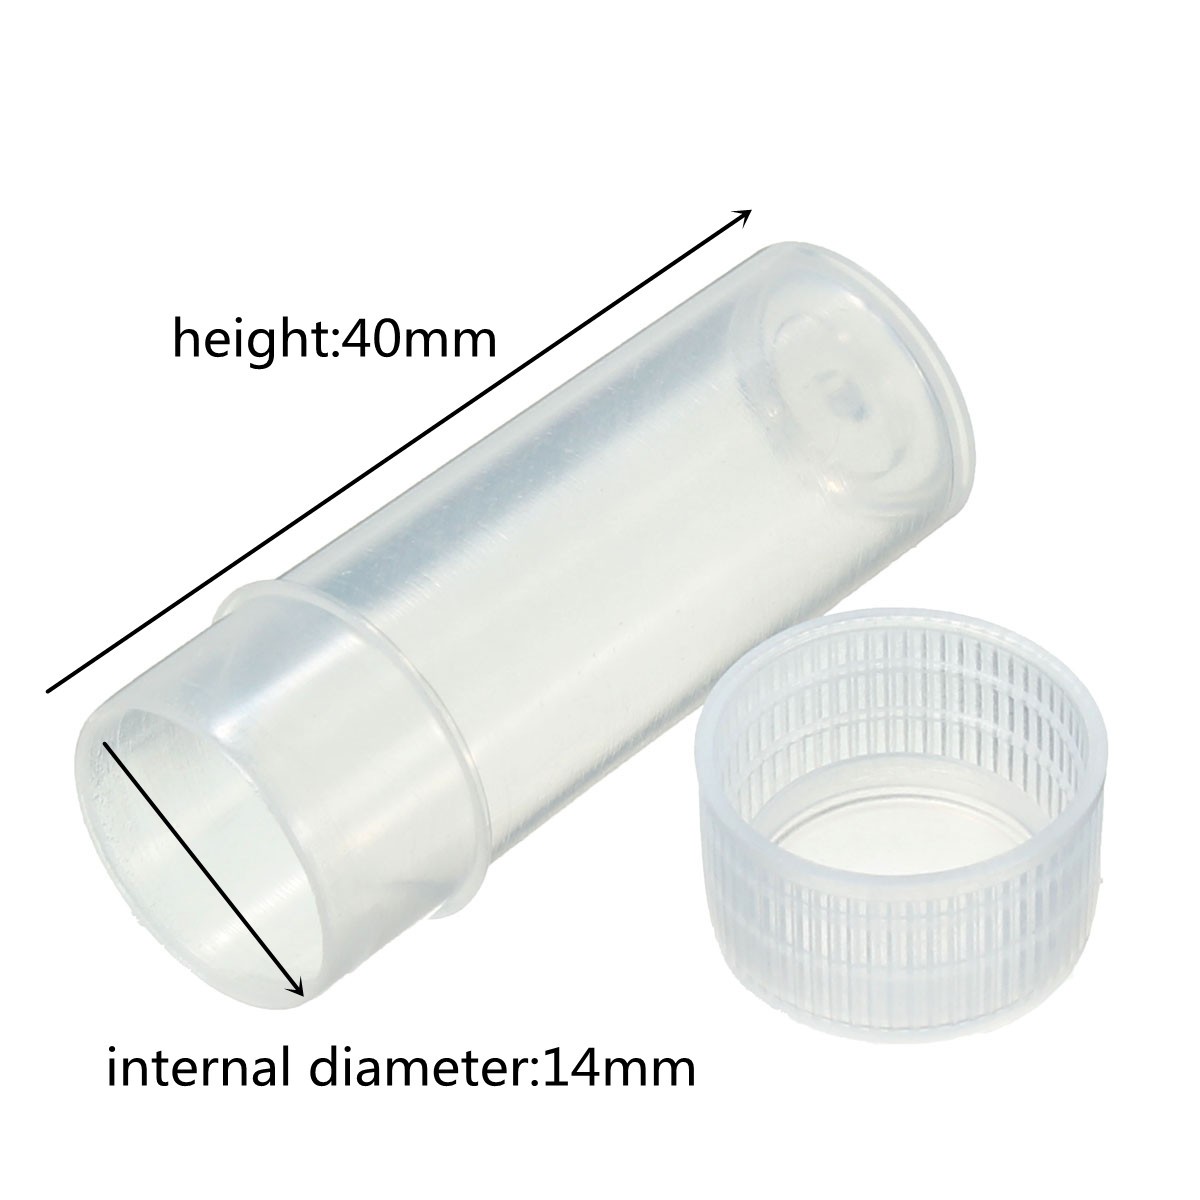 20Pcs-5ml-Chemistry-Plastic-Test-Tube-Vials-with-Seal-Caps-Pack-Container-1300038-2